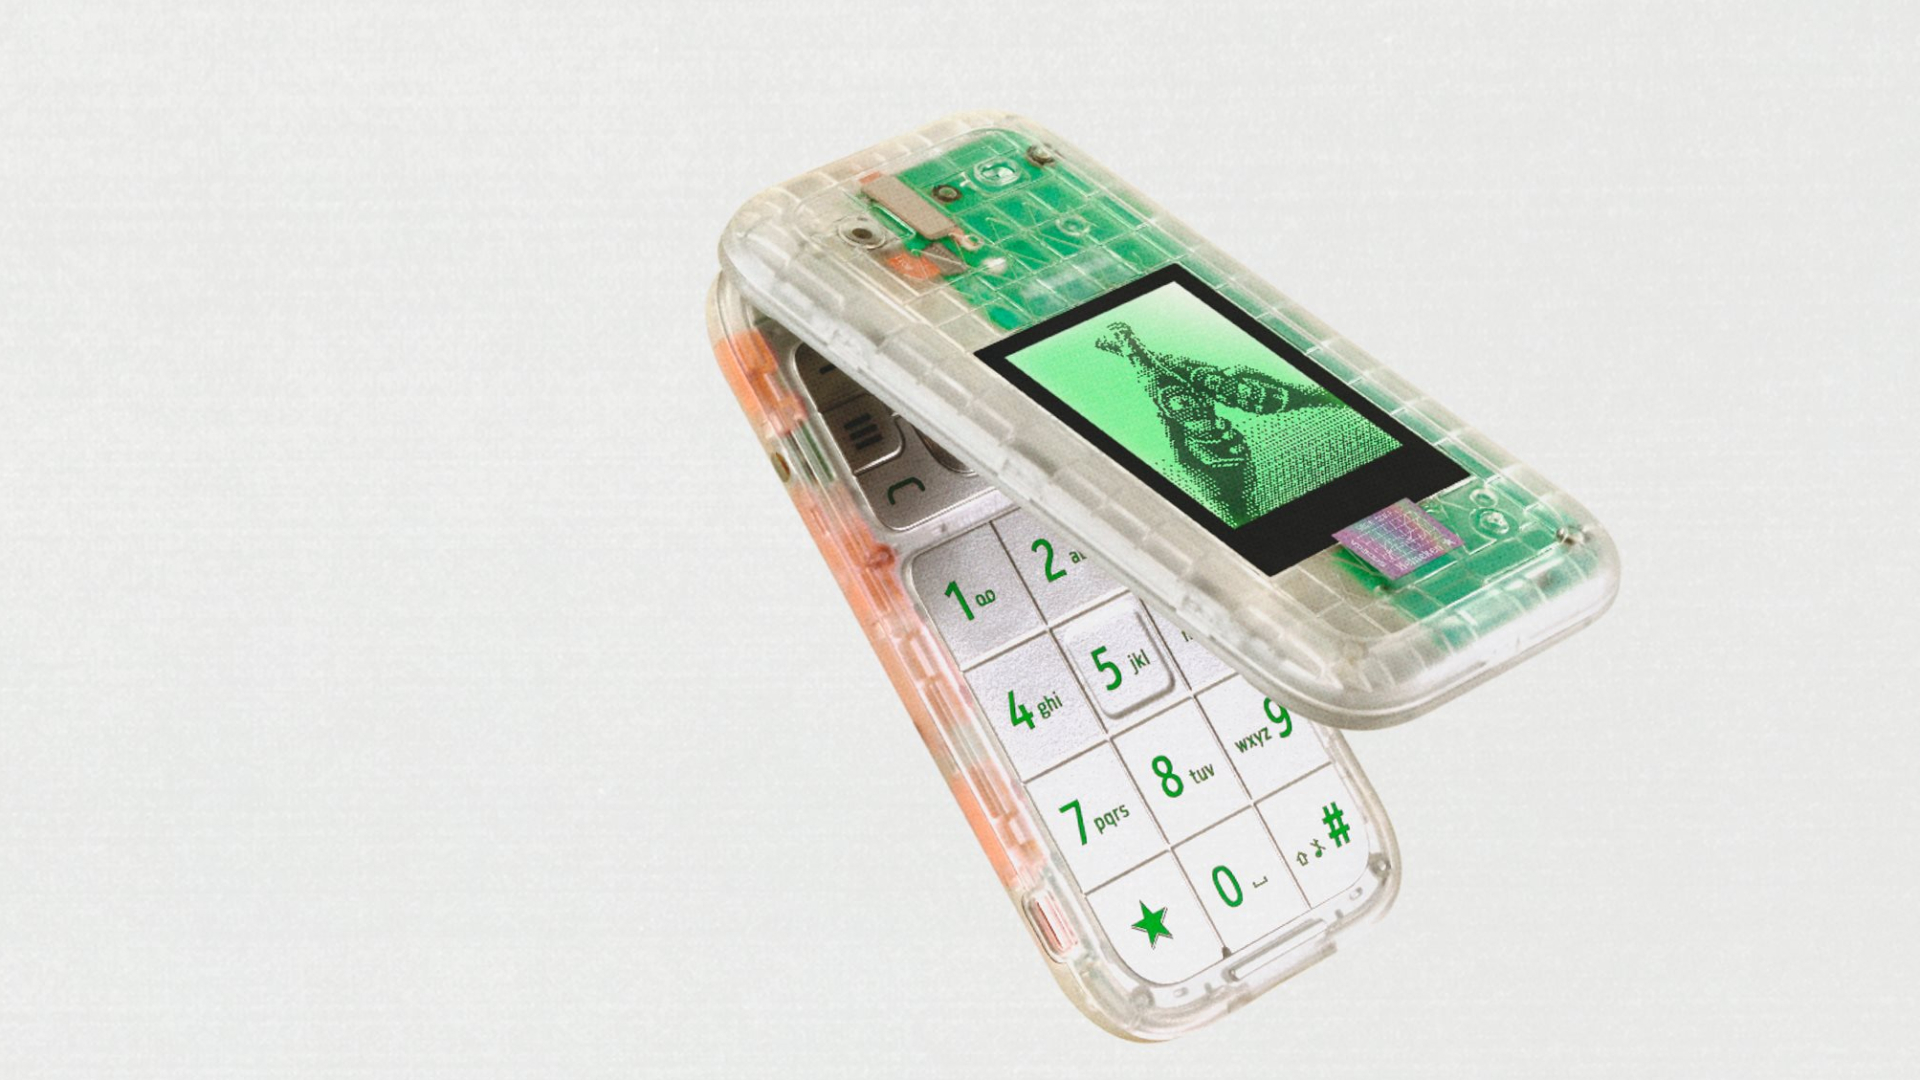 The Boring Phone is a with a transparent flip phone that takes me back to my childhood